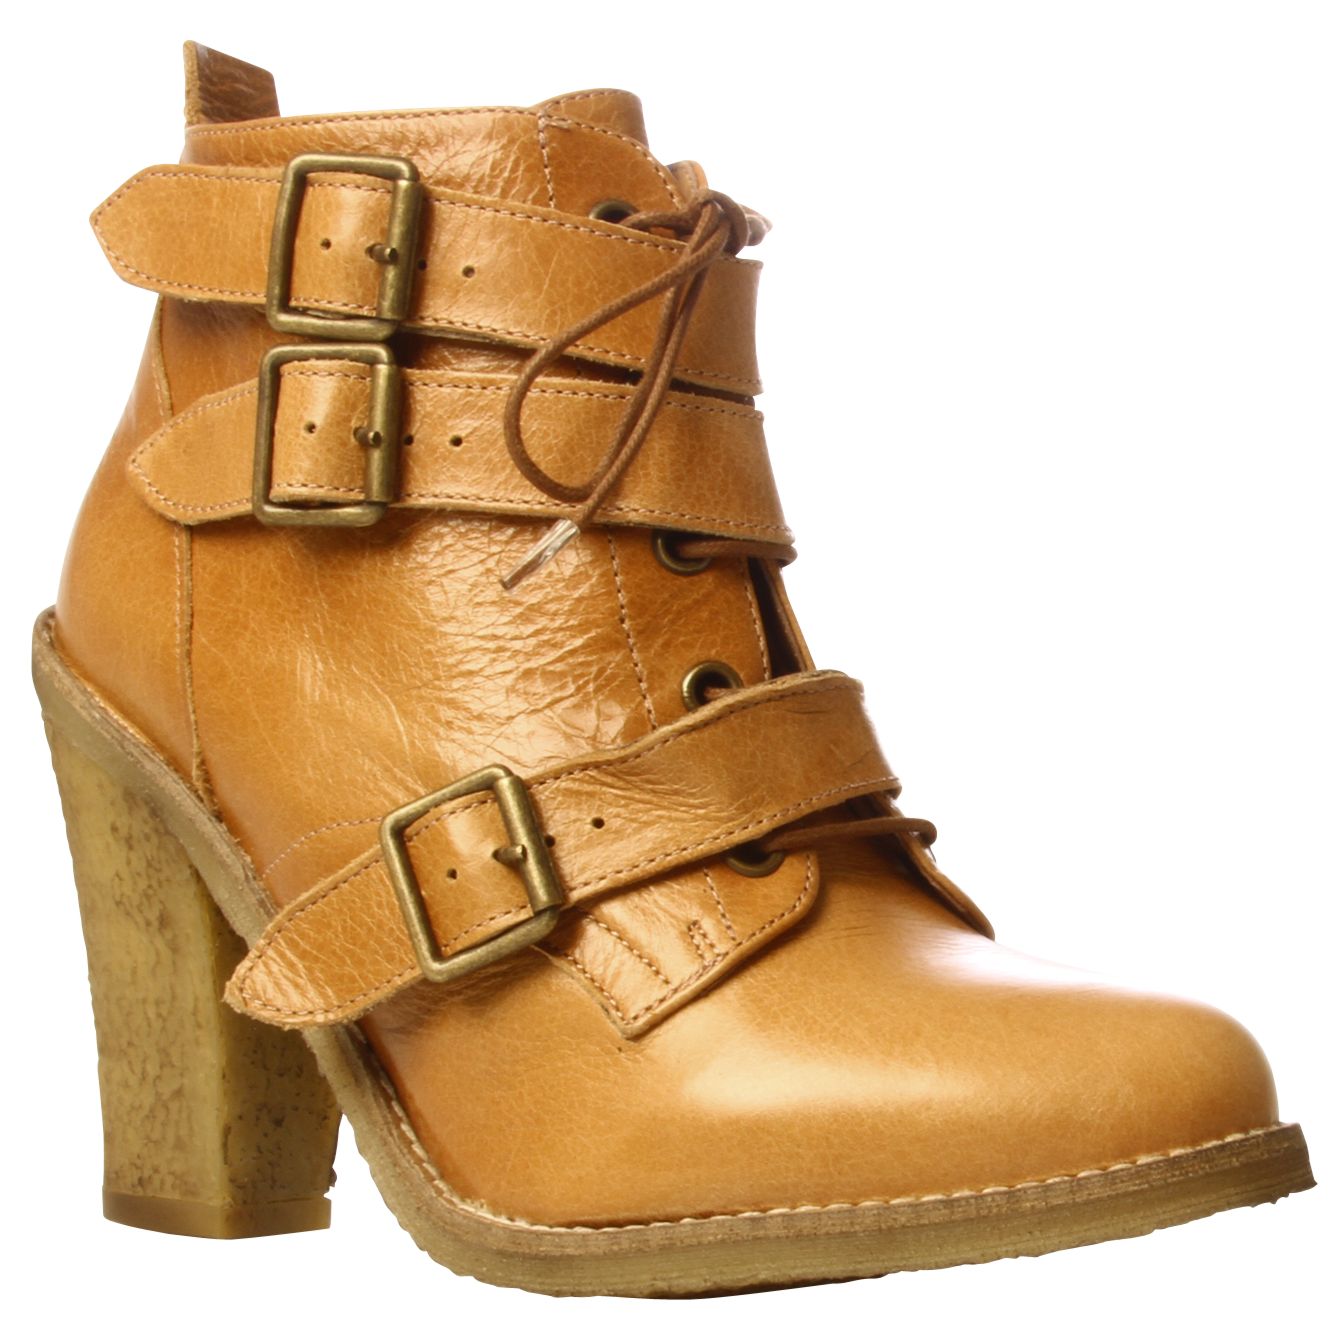 KG by Kurt Geiger Victor Lace Up Buckle Ankle Boots, Tan at John Lewis